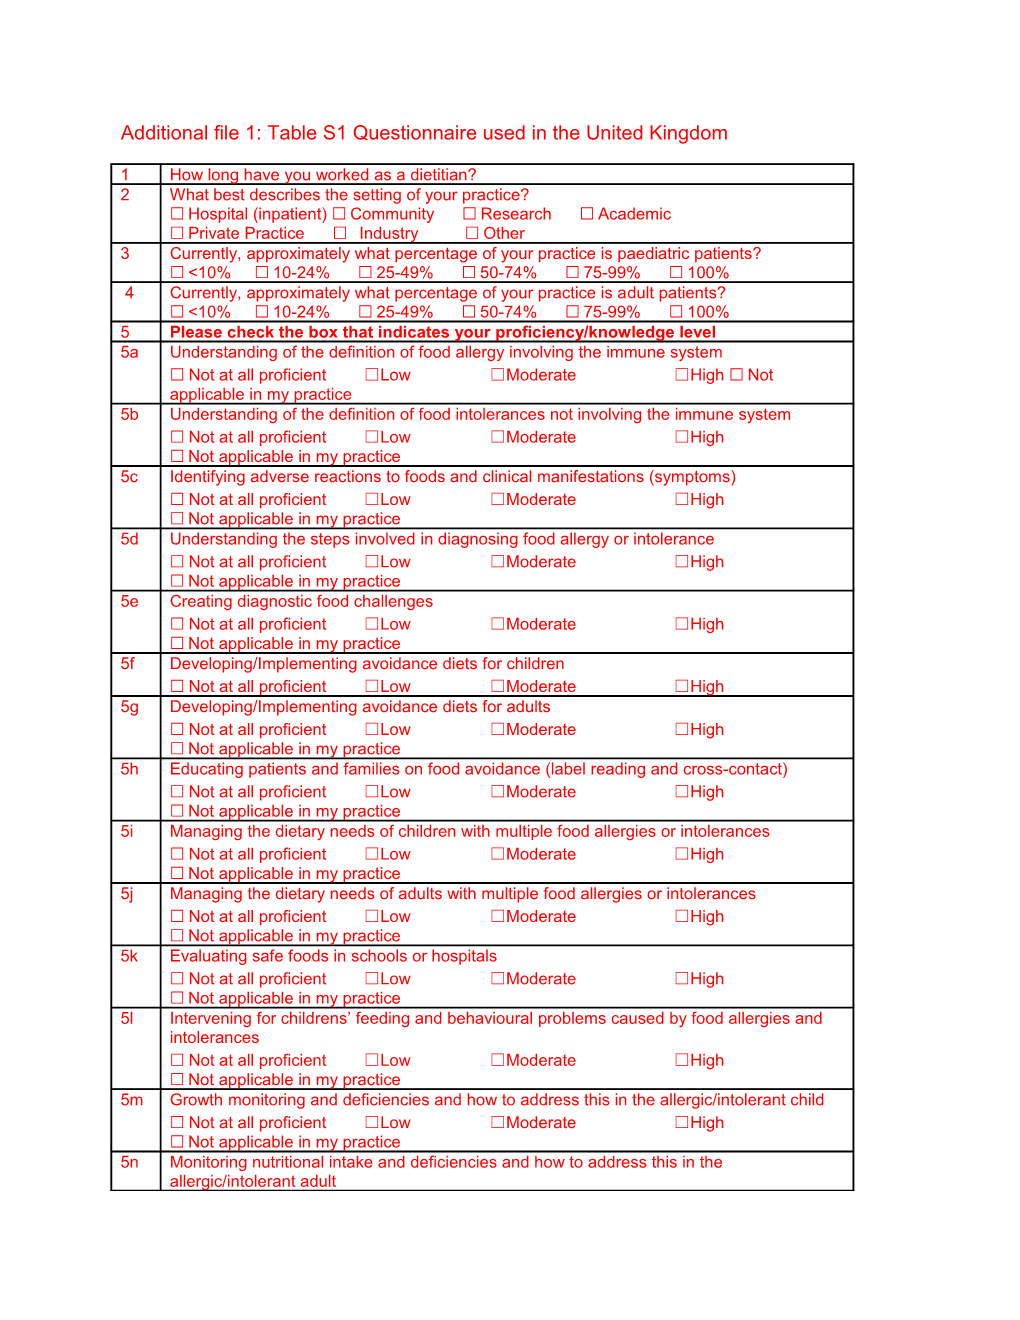 Additional File 1: Table S1 Questionnaire Used in the United Kingdom